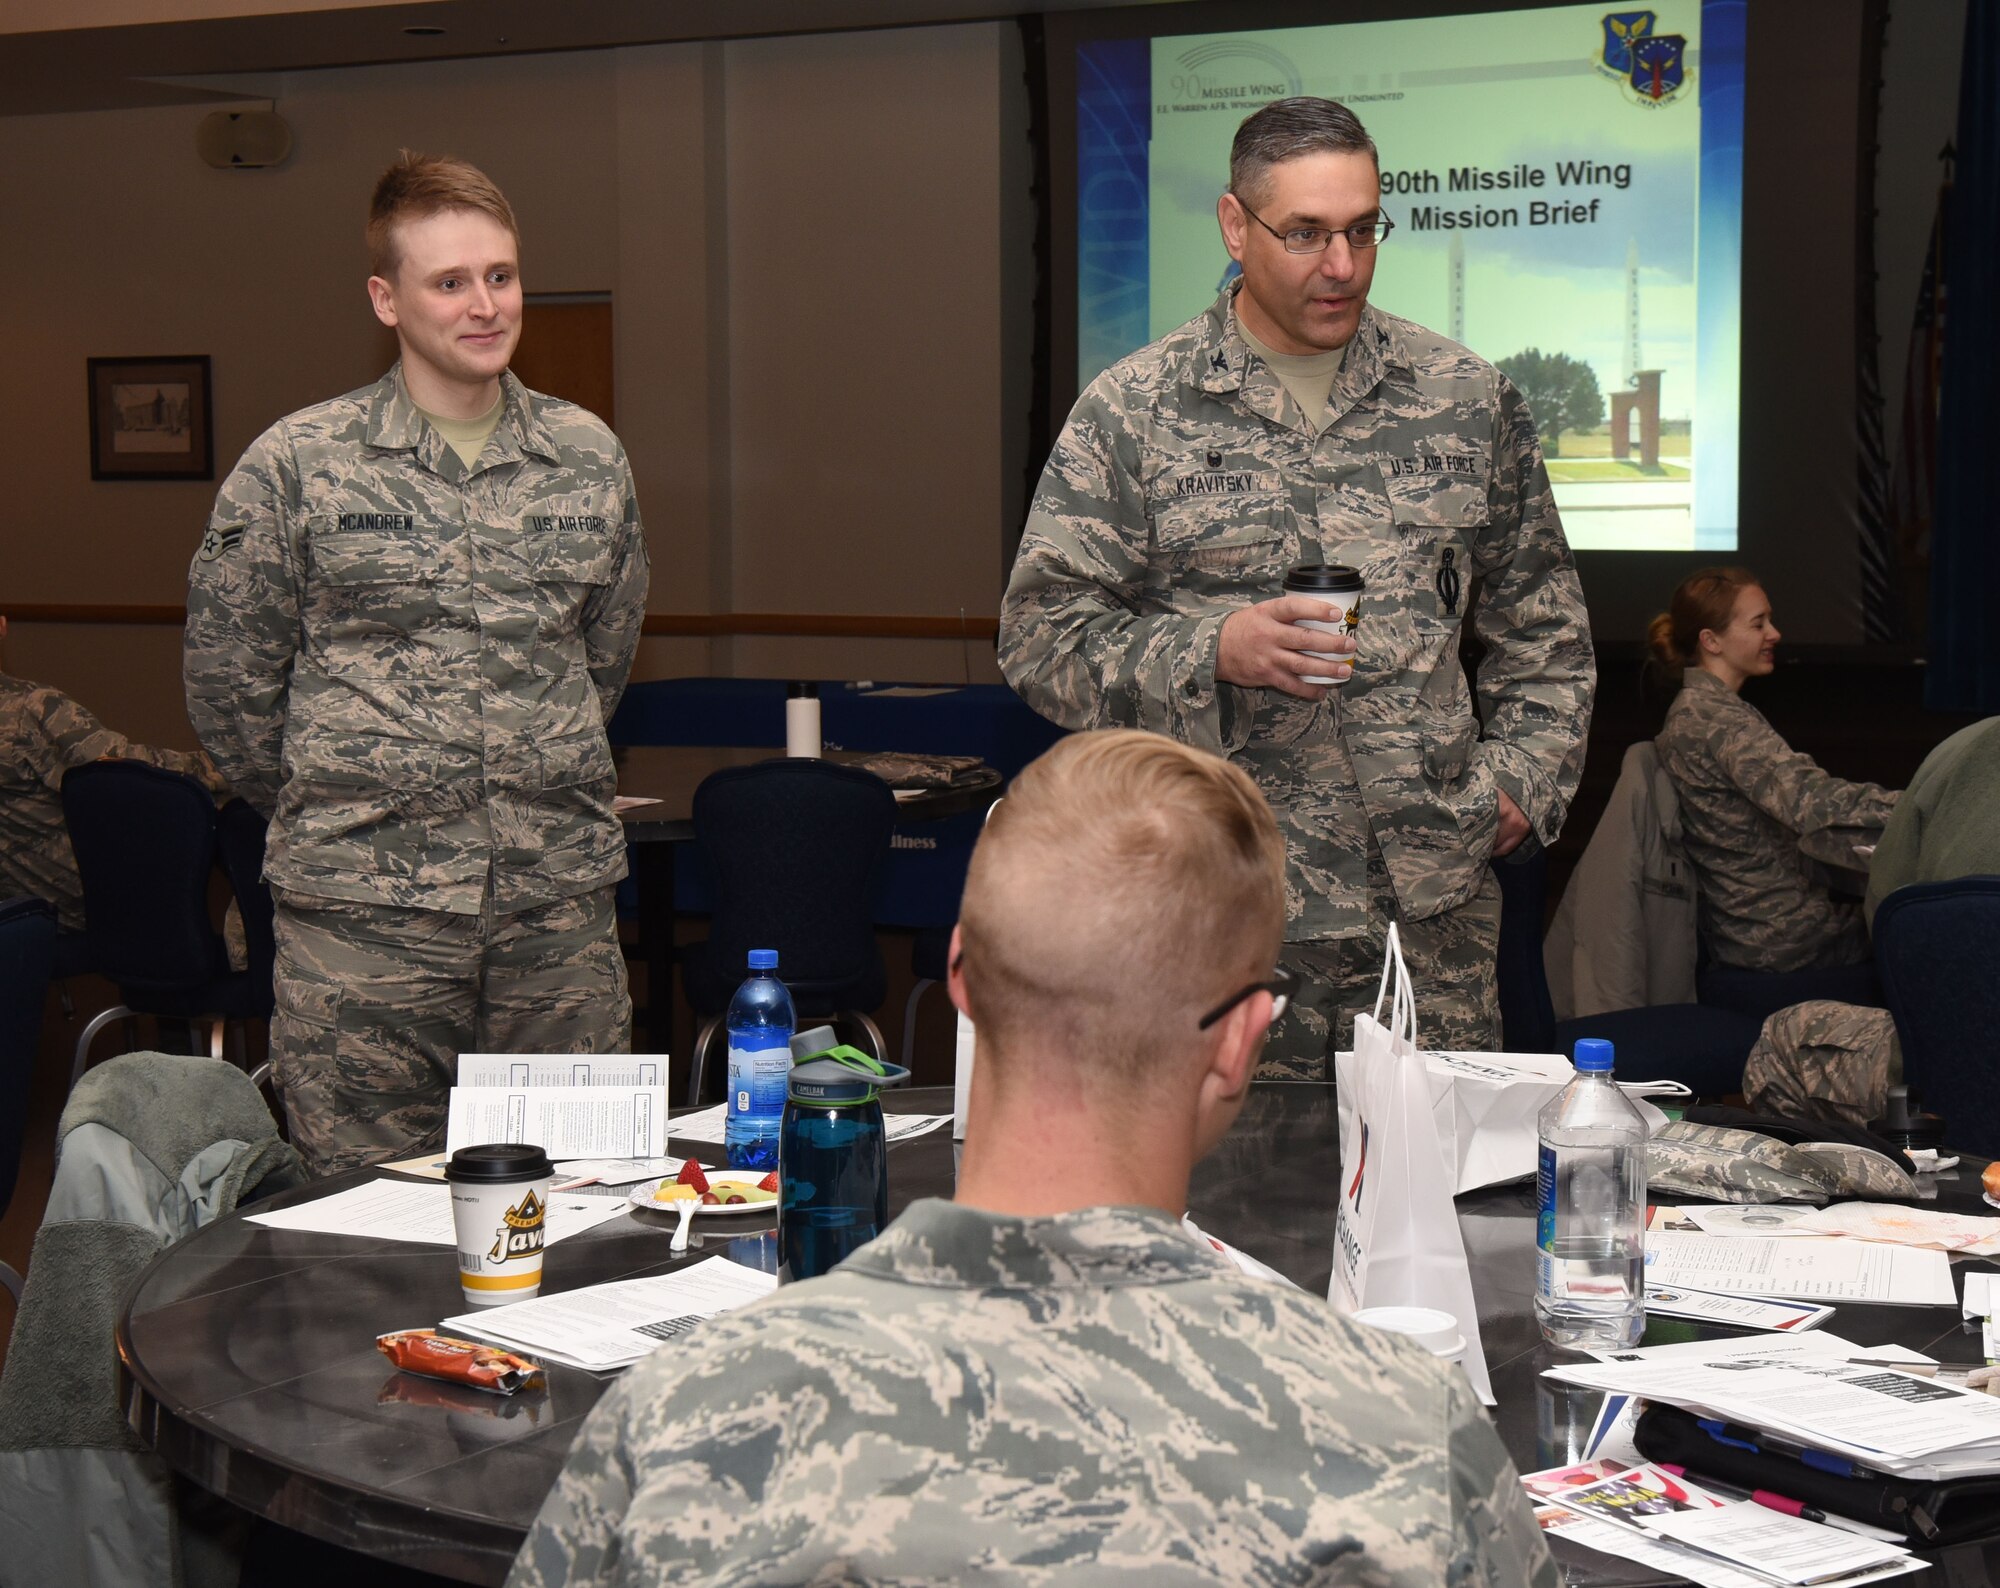 Col. Stephen Kravitsky, 90th Missile Wing commander, and Airman 1st Class Joseph McAndrew, 90th Logistics Readiness Squadron traffic management technician, socialize with new personnel during Right Start at F.E. Warren Air Force Base, Wyo., Jan. 11, 2017. McAndrew had the opportunity to spend a day with the wing commander to experience what a typical day is like for him. (U.S. Air Force photo by Airman 1st Class Breanna Carter)